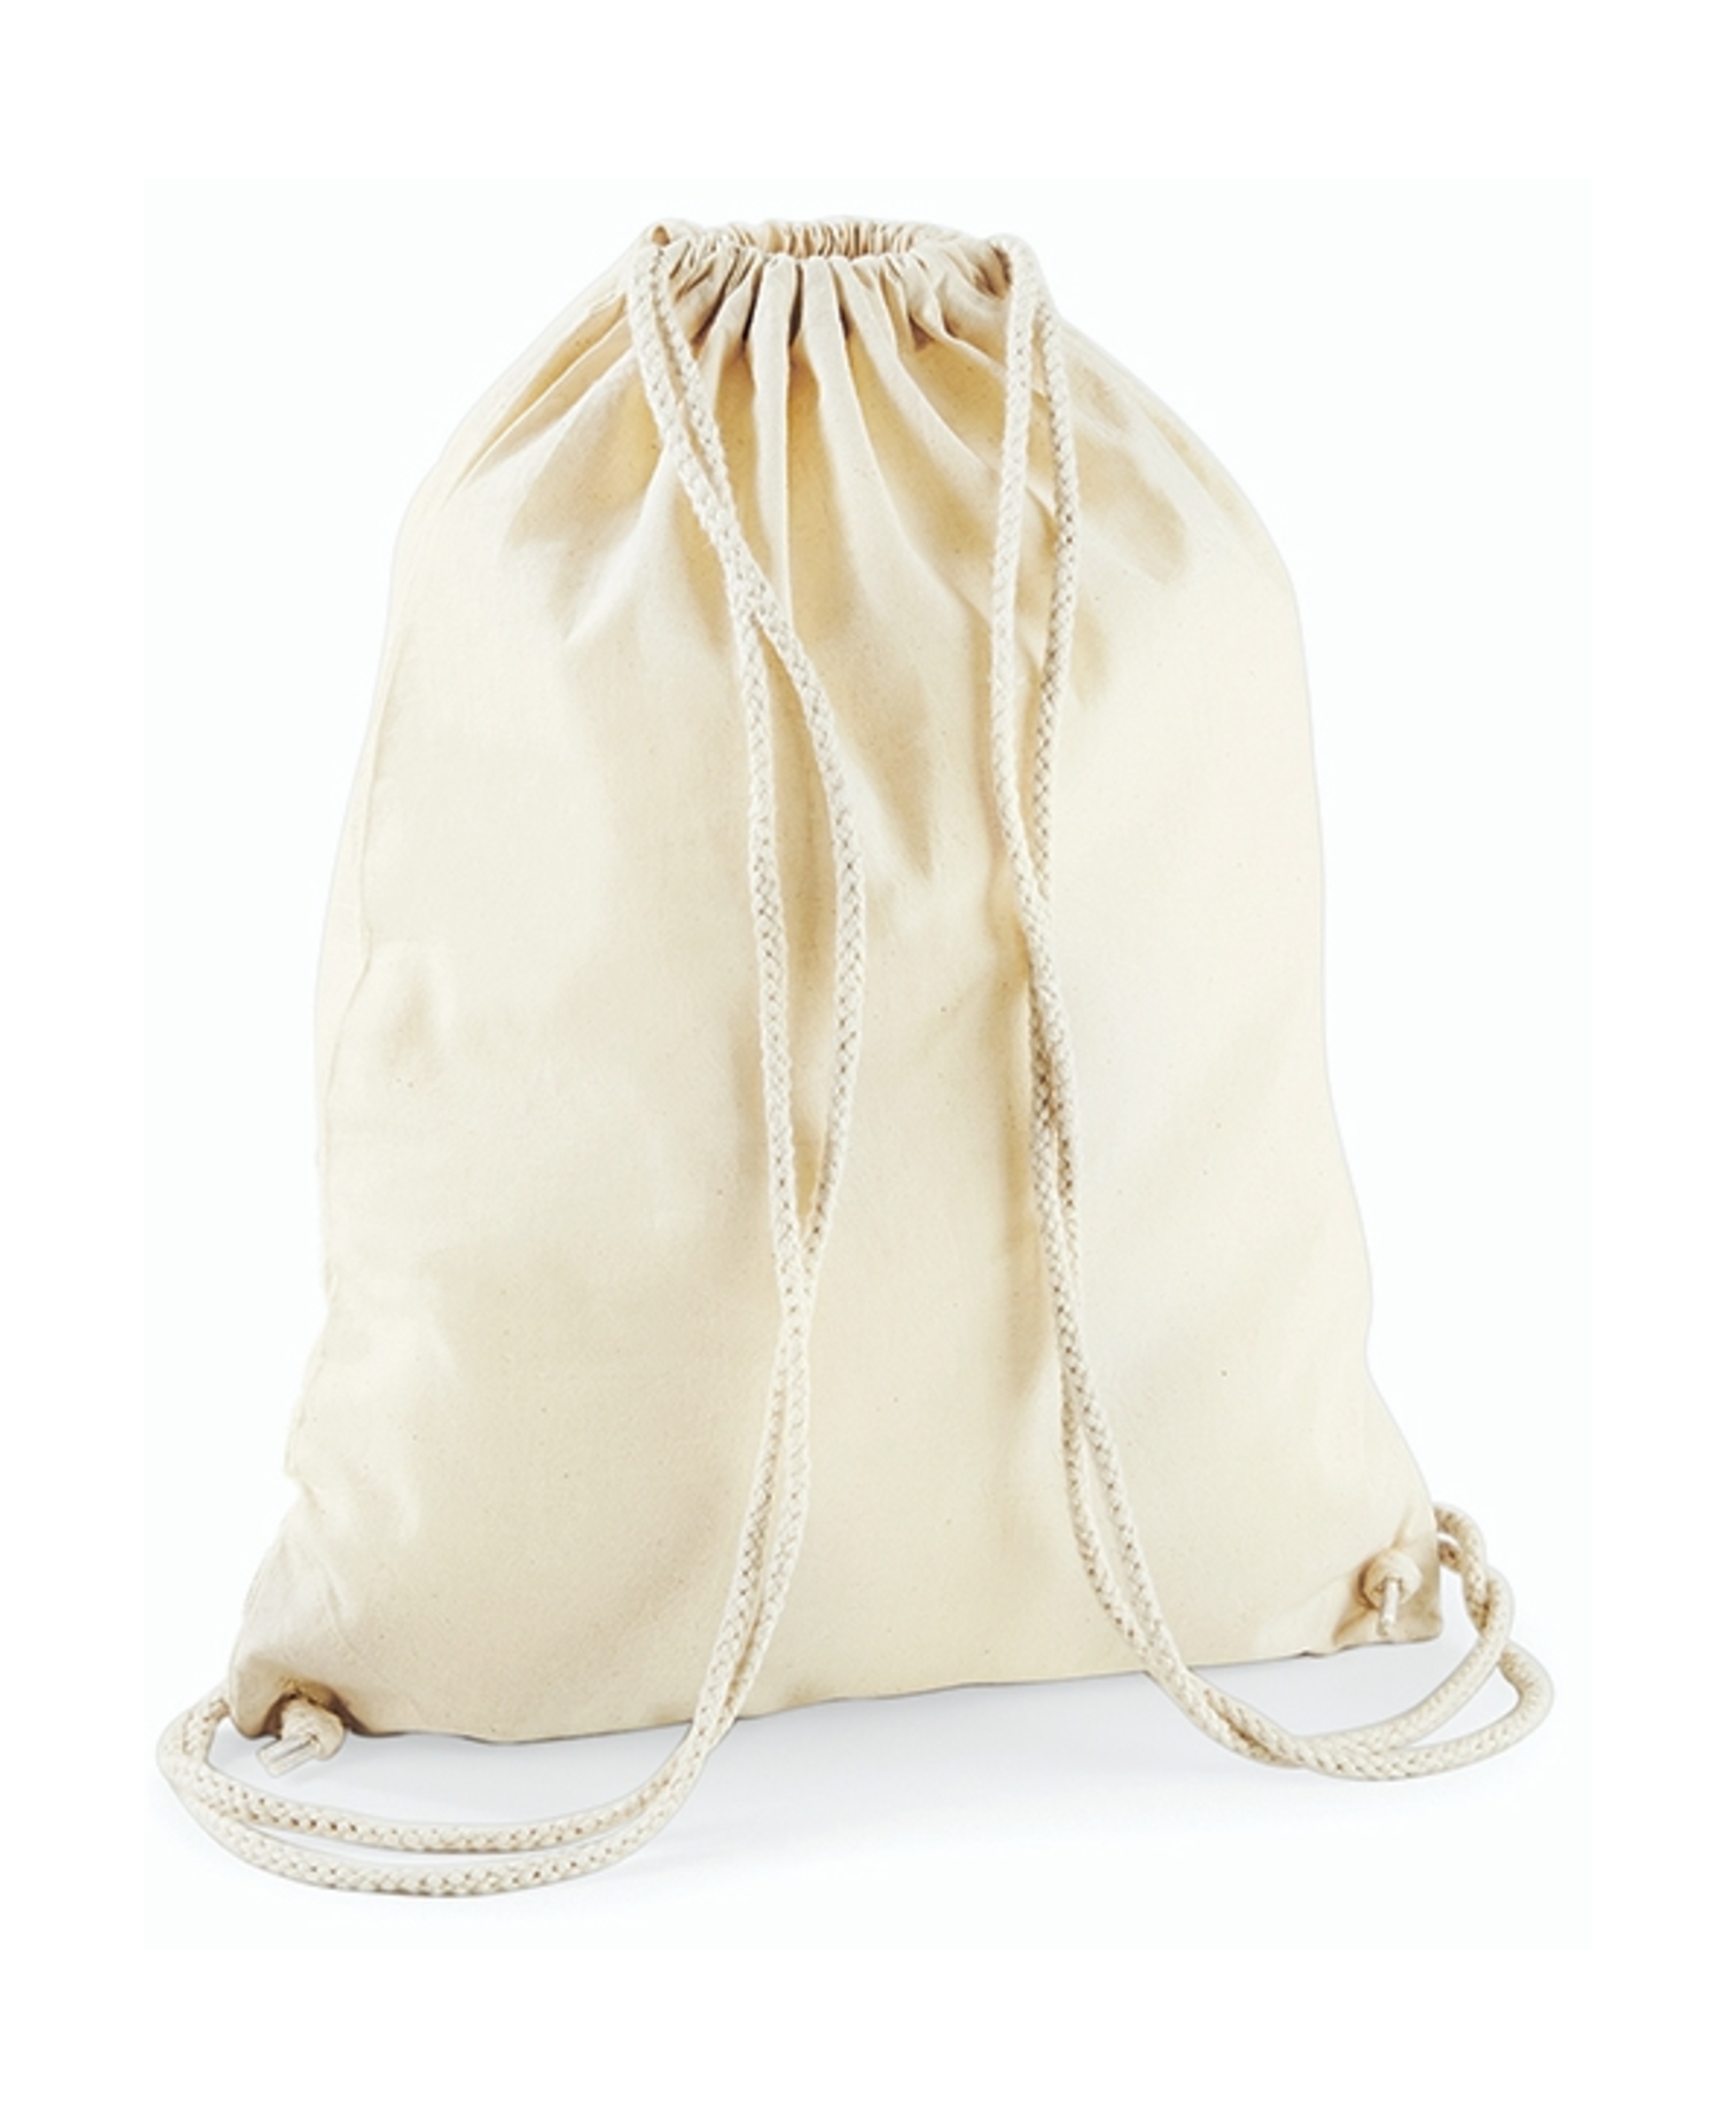 Westford Mill Cotton Gymsack - Natural - One Size